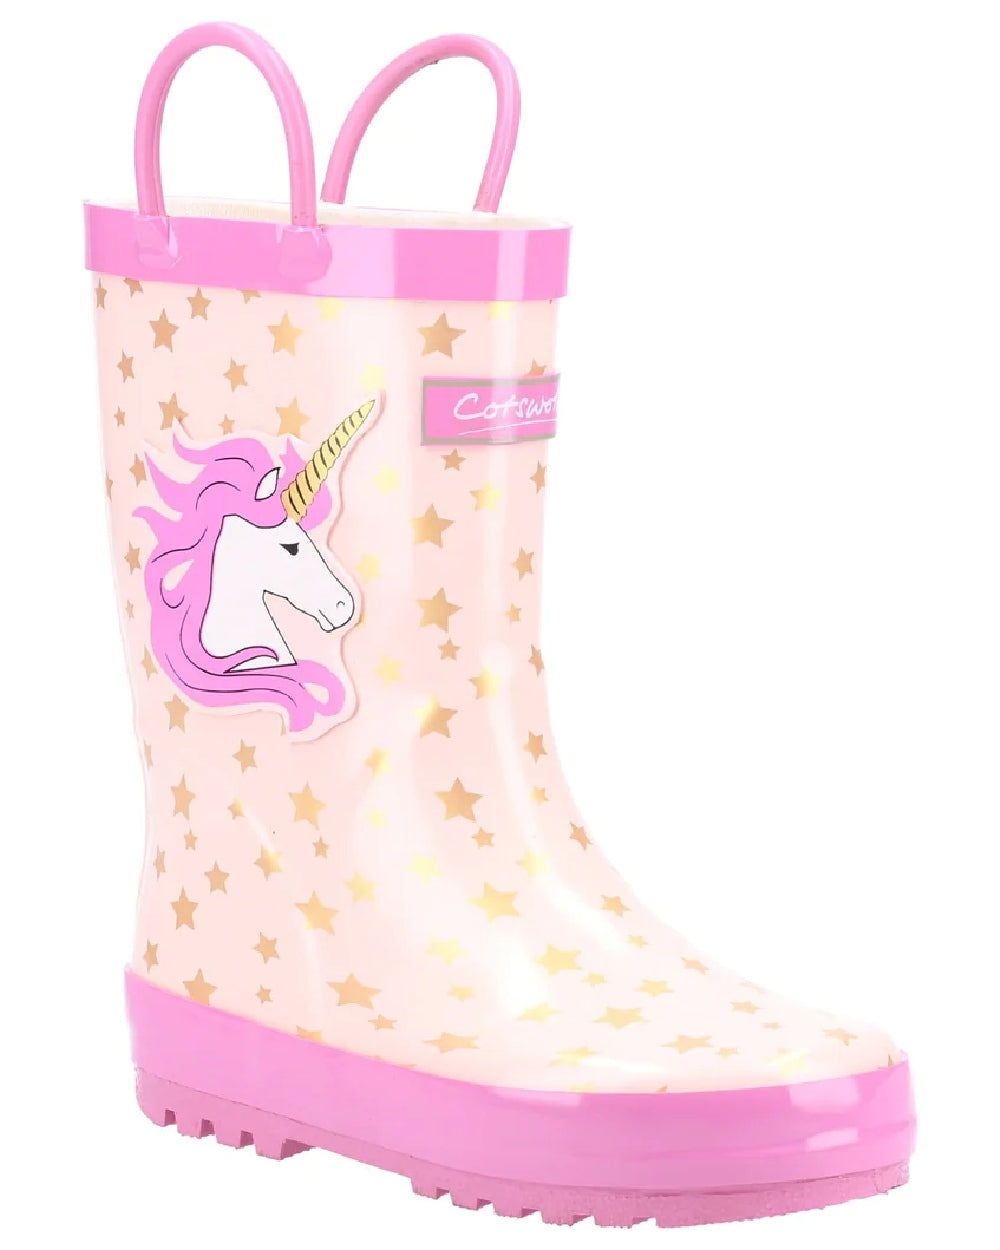 Wotswold Childrens Puddle Waterproof Pull On Boots in Unicorn 